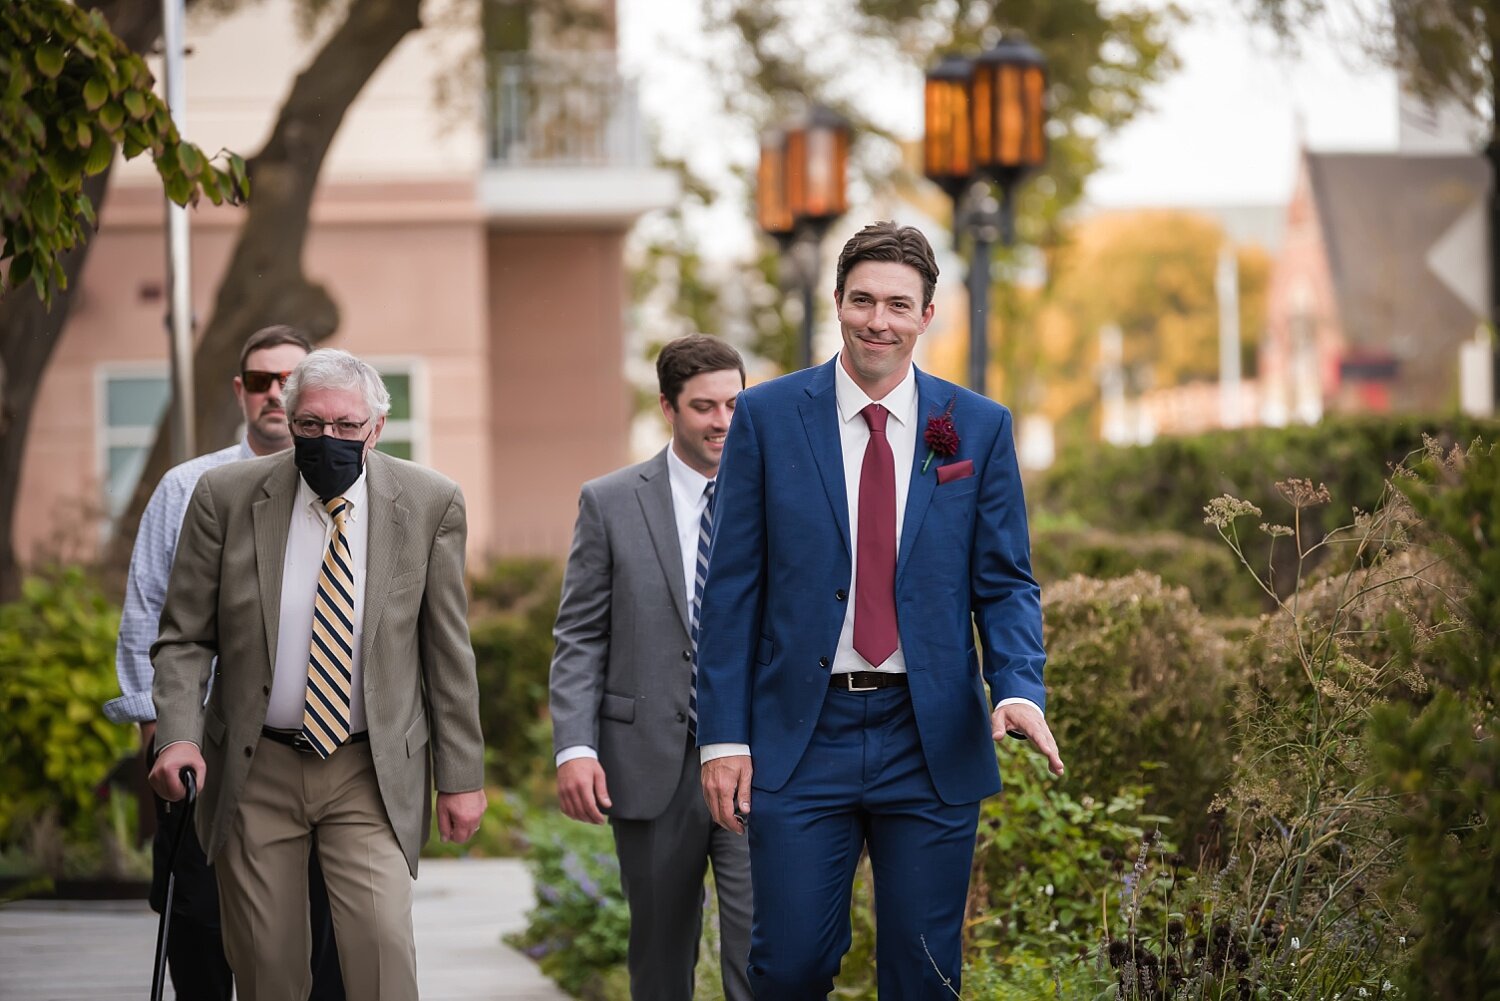  A groom wearing a blue suit and red tie walks down the aisle before his wedding.  